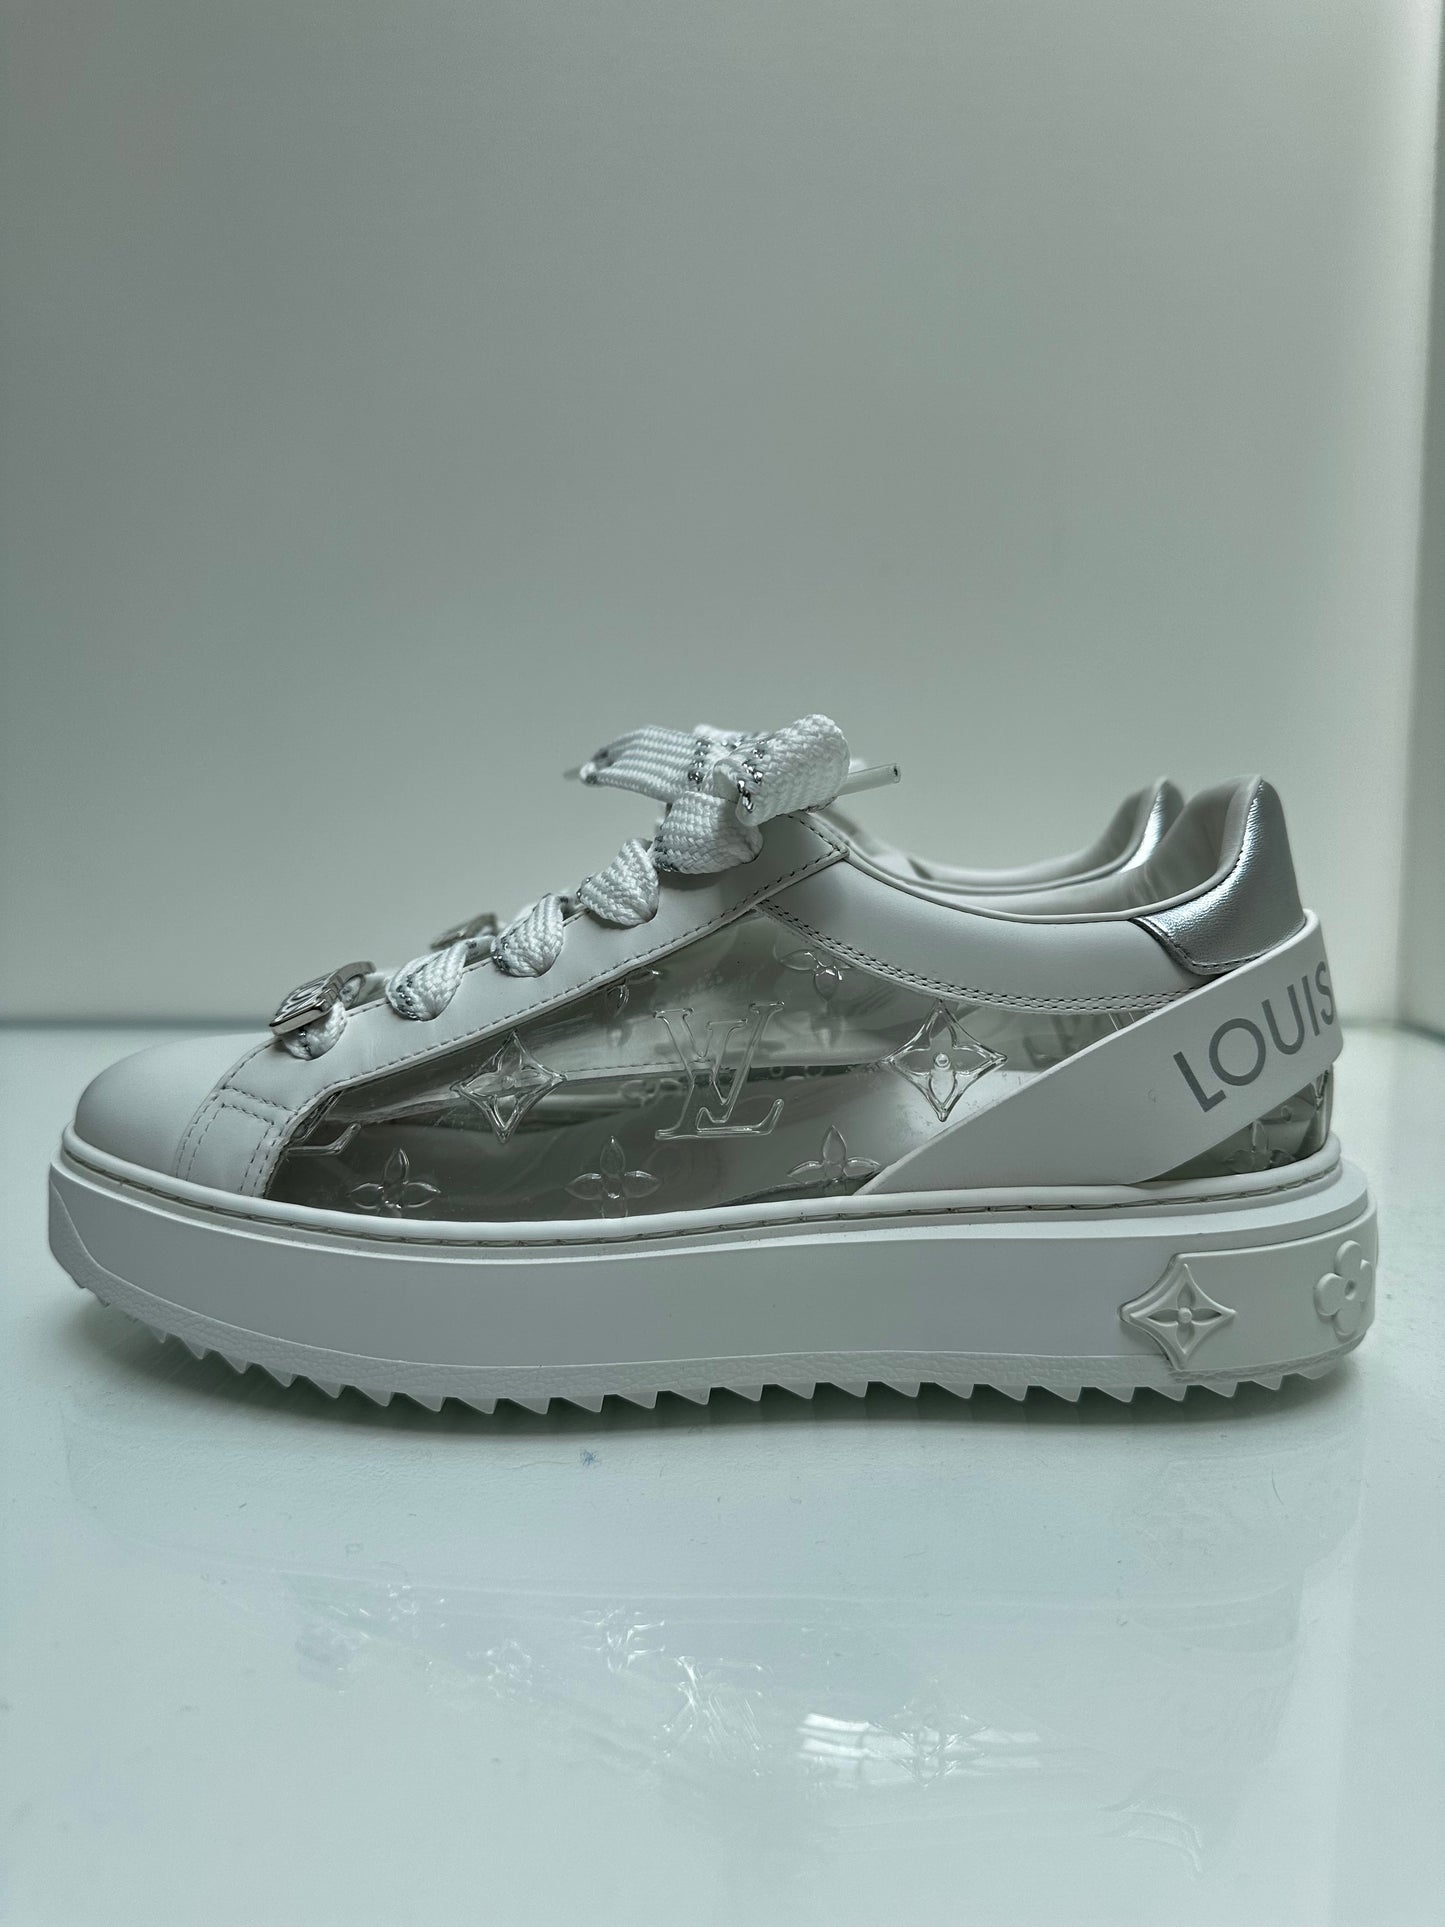 Louis Vuitton White Clear Sneakers, 37.5